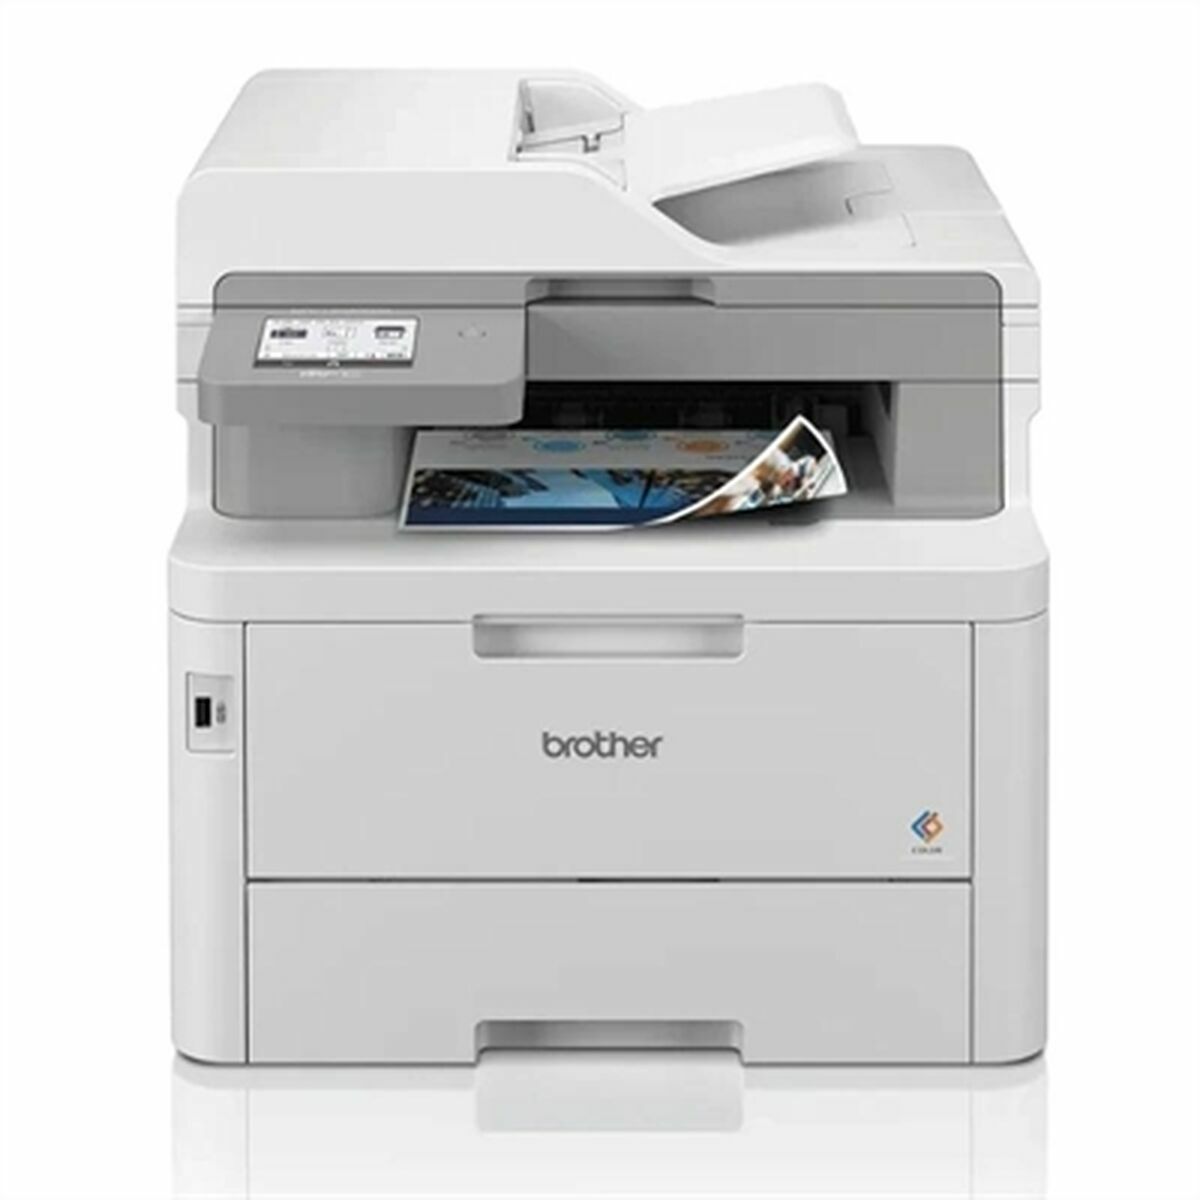 Laser Printer Brother MFCL8340CDWRE1, Brother, Computing, Printers and accessories, laser-printer-brother-mfcl8340cdwre1, Brand_Brother, category-reference-2609, category-reference-2642, category-reference-2645, category-reference-t-19685, category-reference-t-19911, category-reference-t-21378, category-reference-t-25692, computers / peripherals, Condition_NEW, office, Price_400 - 500, Teleworking, RiotNook